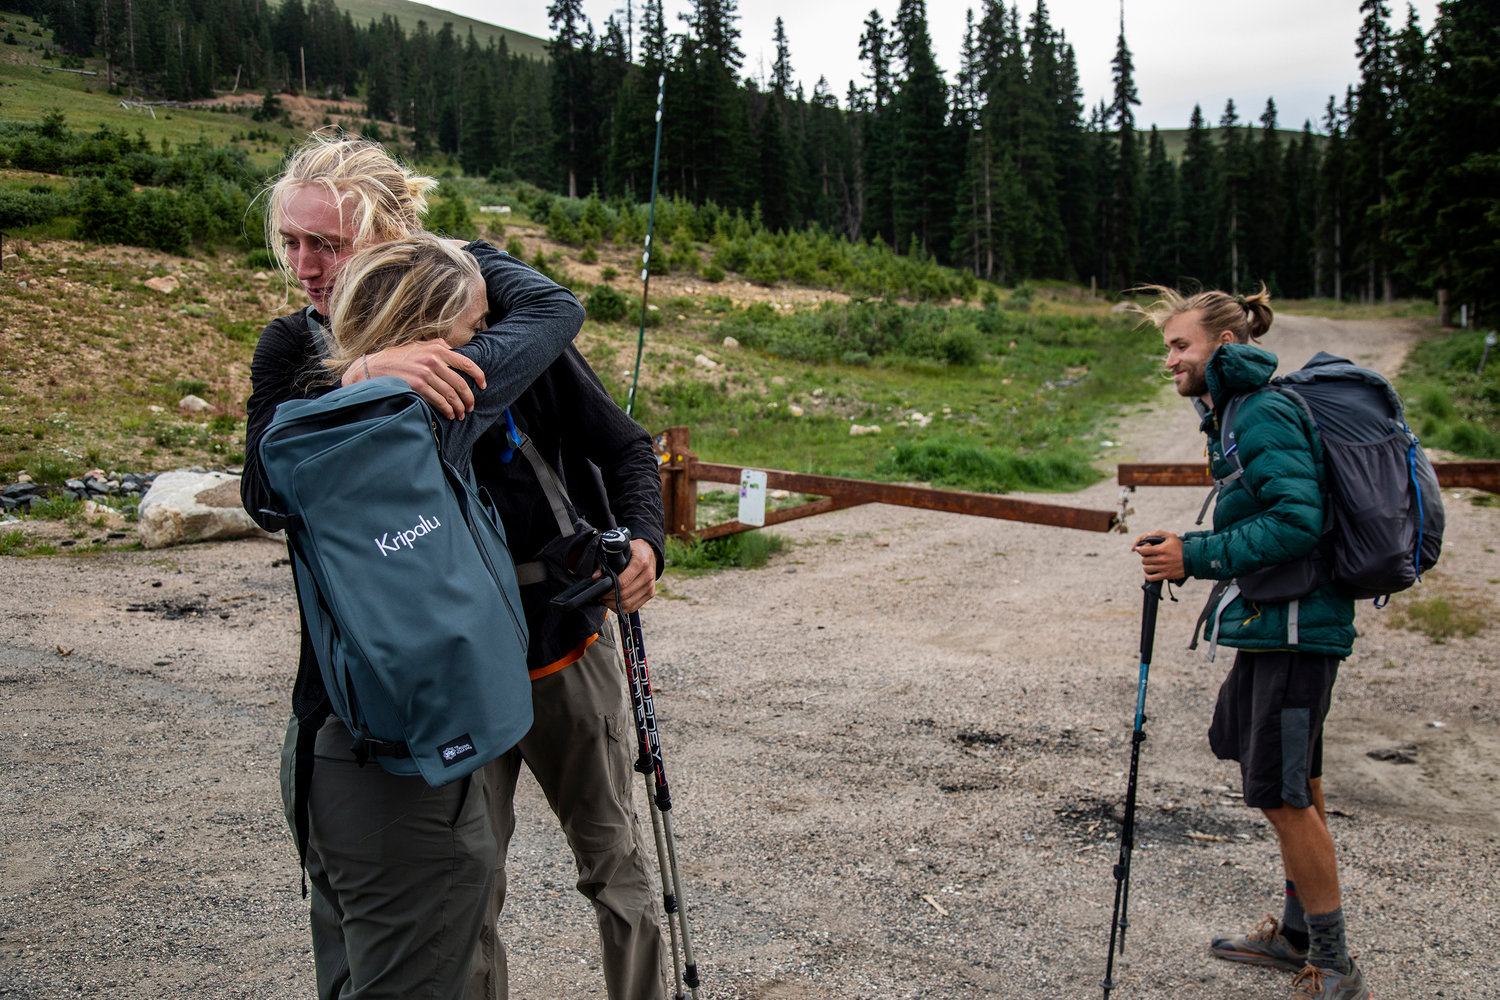 Jackson Parell of Florida with Sammy Potter of Maine, right, hugs his mom Nora Parell as they leave the Berthoud Pass trailhead to continue north on the Continental Divide Trail on Aug. 6, 2021, in Idaho, Colorado. Parell's mom visited the hikers to bring them food and lend them moral support along their journey. (Gina Ferazzi/Los Angeles Times/TNS)